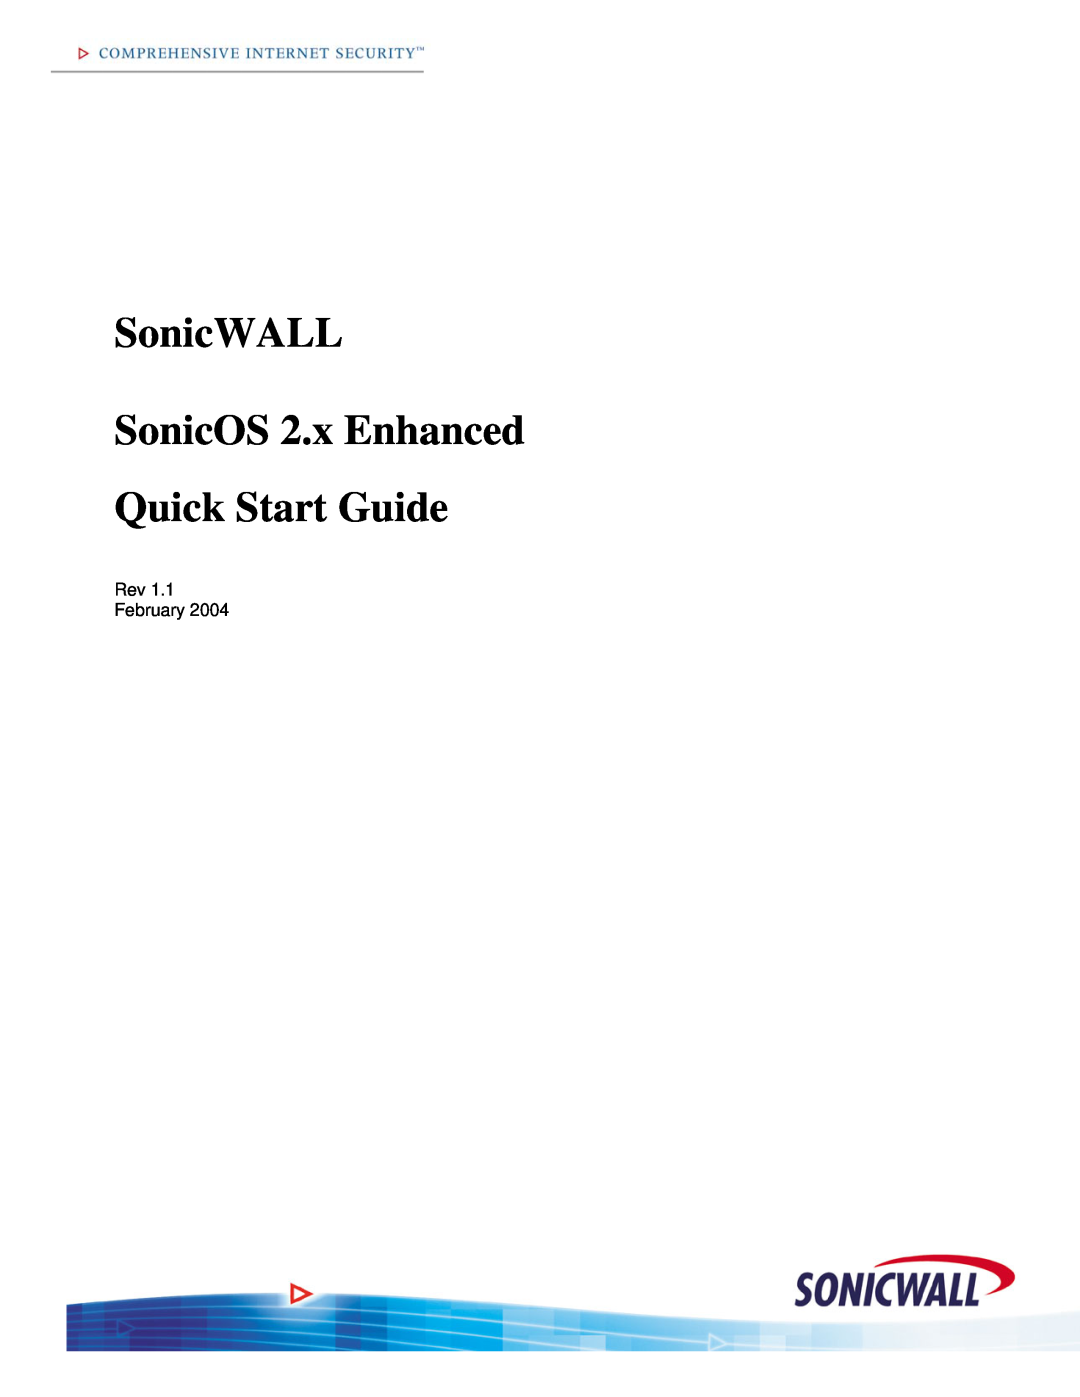 SonicWALL quick start SonicWALL SonicOS 2.x Enhanced Quick Start Guide, Rev February 